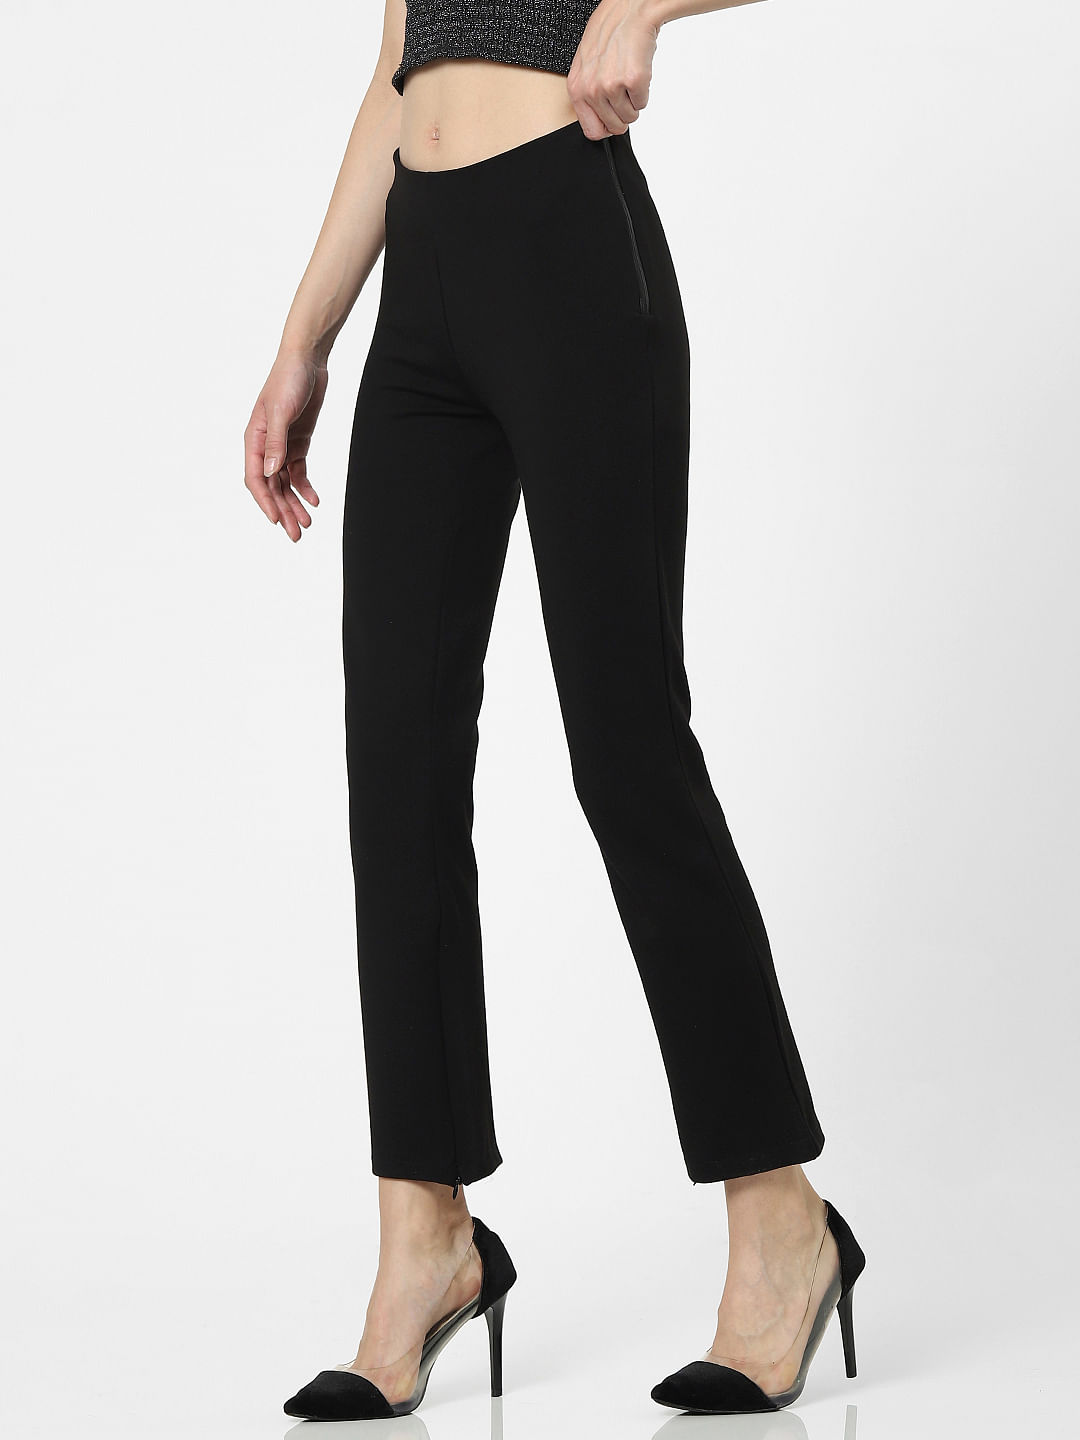 Airlift High-Waist Conceal-Zip Capri Pants in Espresso by Alo Yoga | Ballet  for Women